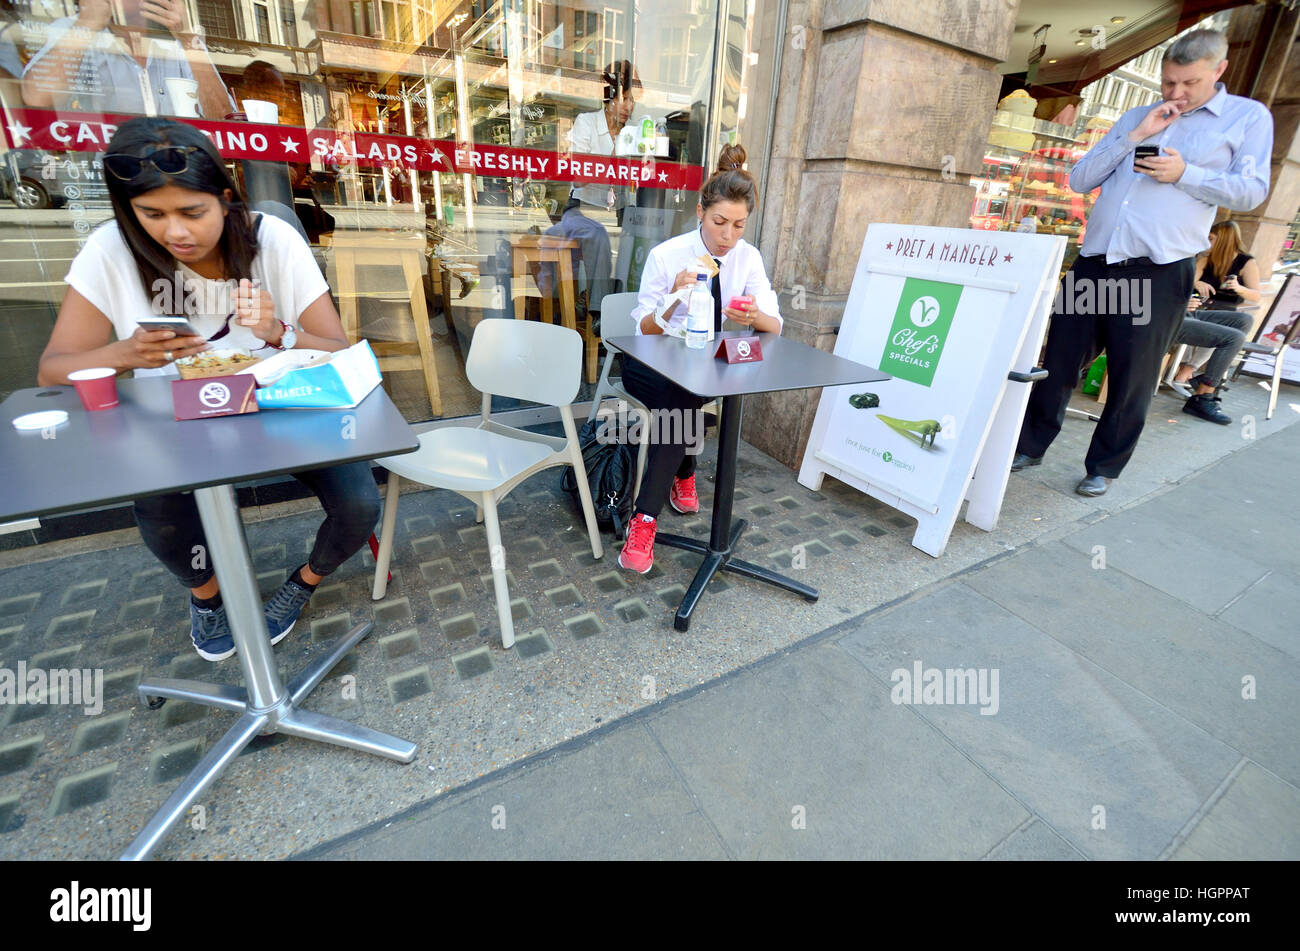 London, England, UK. Pret a Manger shop - three people outside looking at their mobile phones Stock Photo